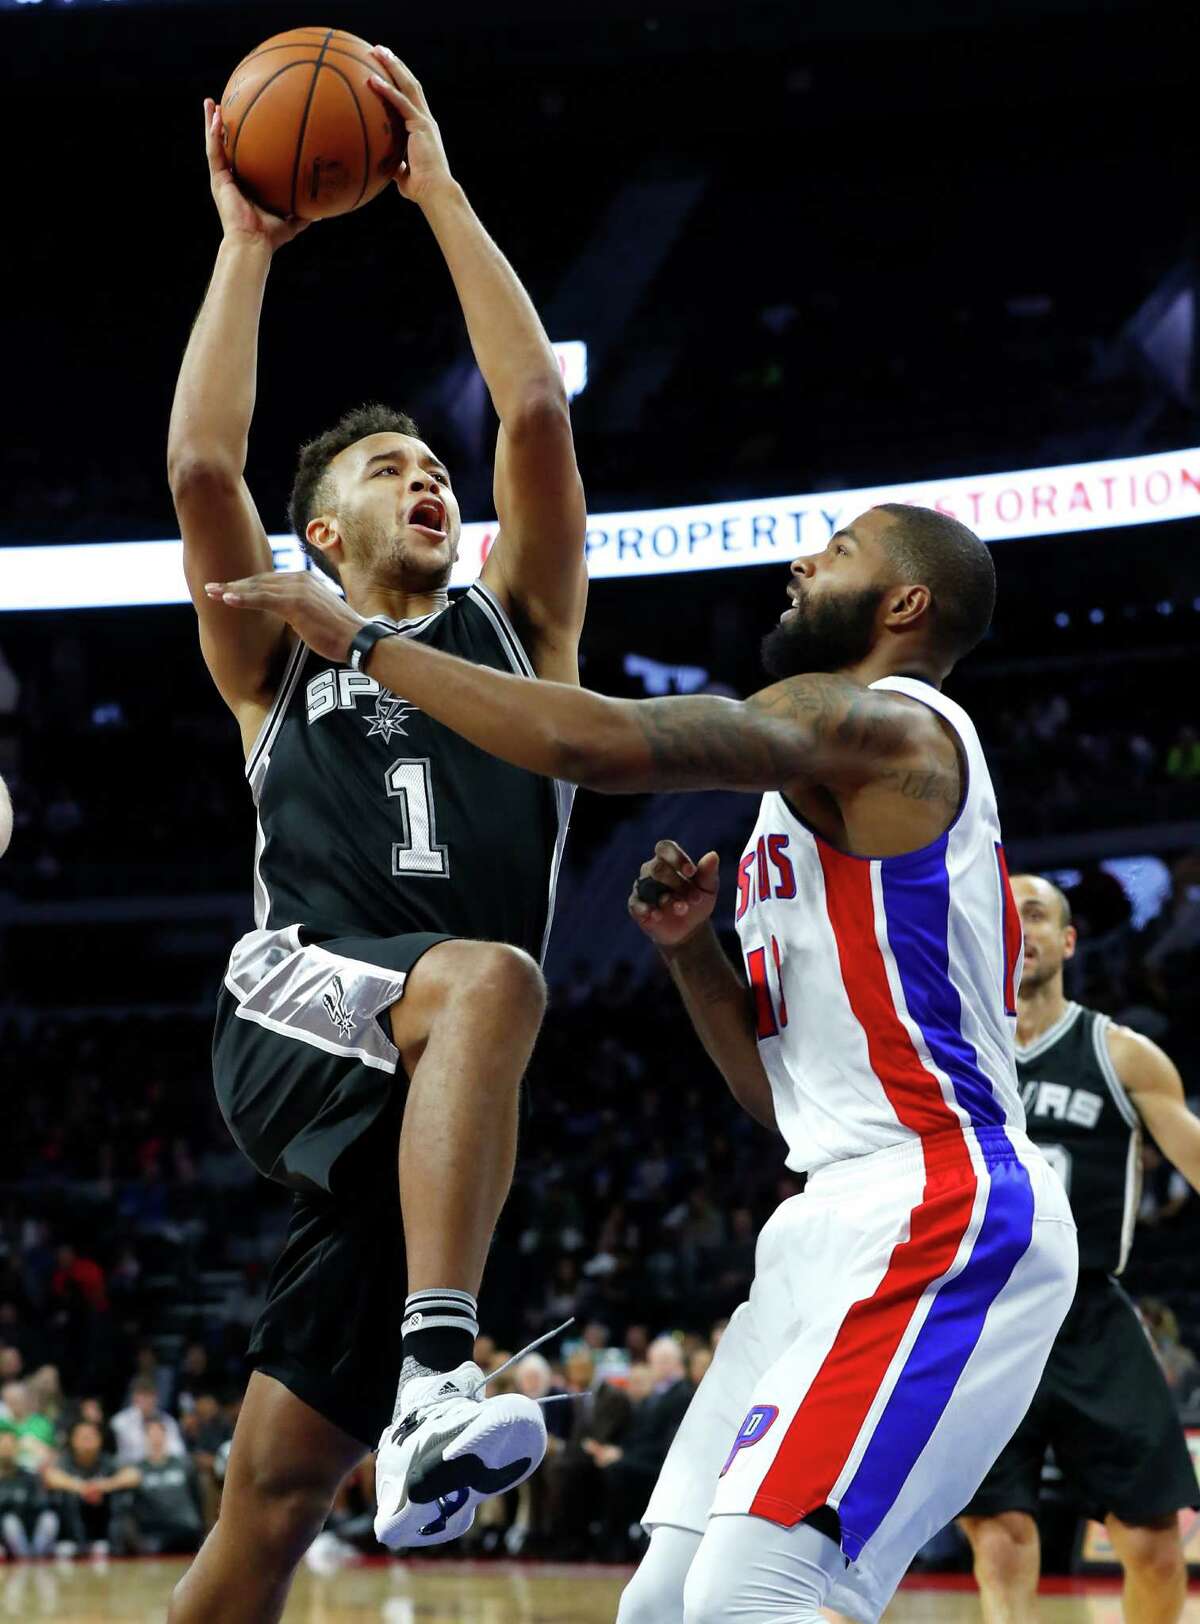 Spurs forward Kyle Anderson drives on Detroit Pistons forward Marcus Morris in the first half of a preseason game in Auburn Hills, Mich., on Oct. 10, 2016.